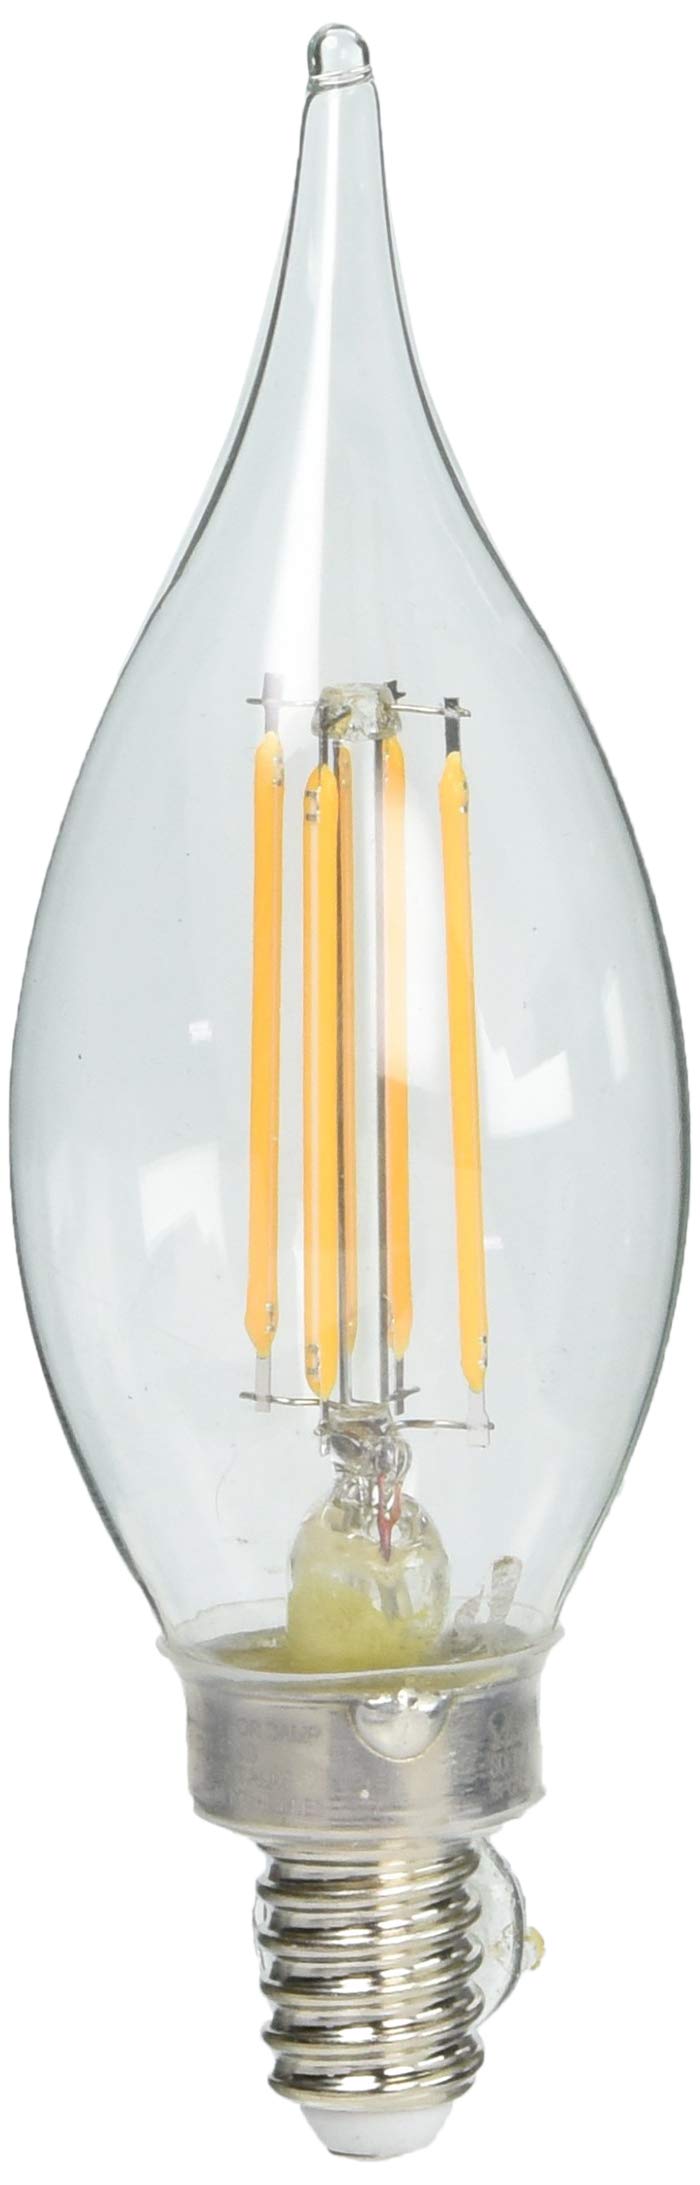 FEIT ELECTRIC BPCFC60/927CA/FIL BPCFC60927CAFIL/2/RP bulb, product specific